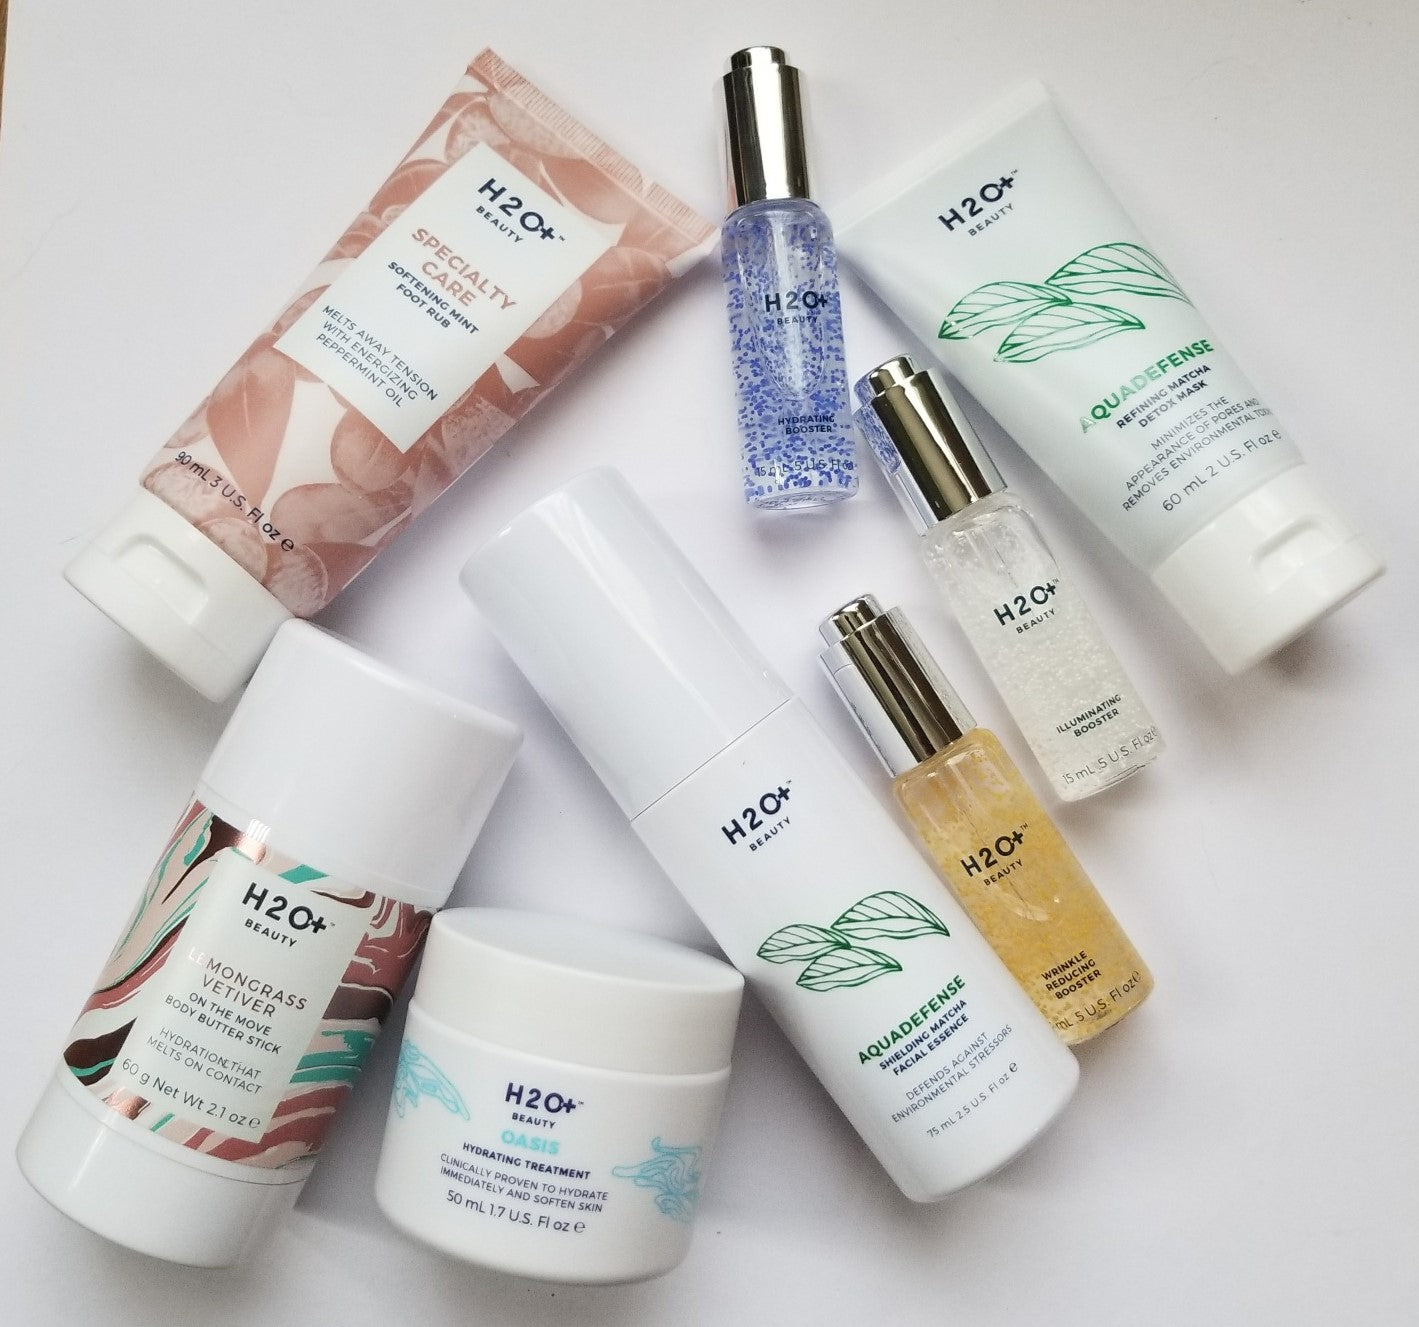 Review, Ingredients, Photos, Swatches, Skincare Trend 2018, 2019, 2020: H20+ Beauty Body Butter Stick, Wrinkle Reducing Booster, Illuminating Booster, Hydrating Booster, Oasis Hydrating Treatment, Matcha Detox Mask, Mint Foot Scrub